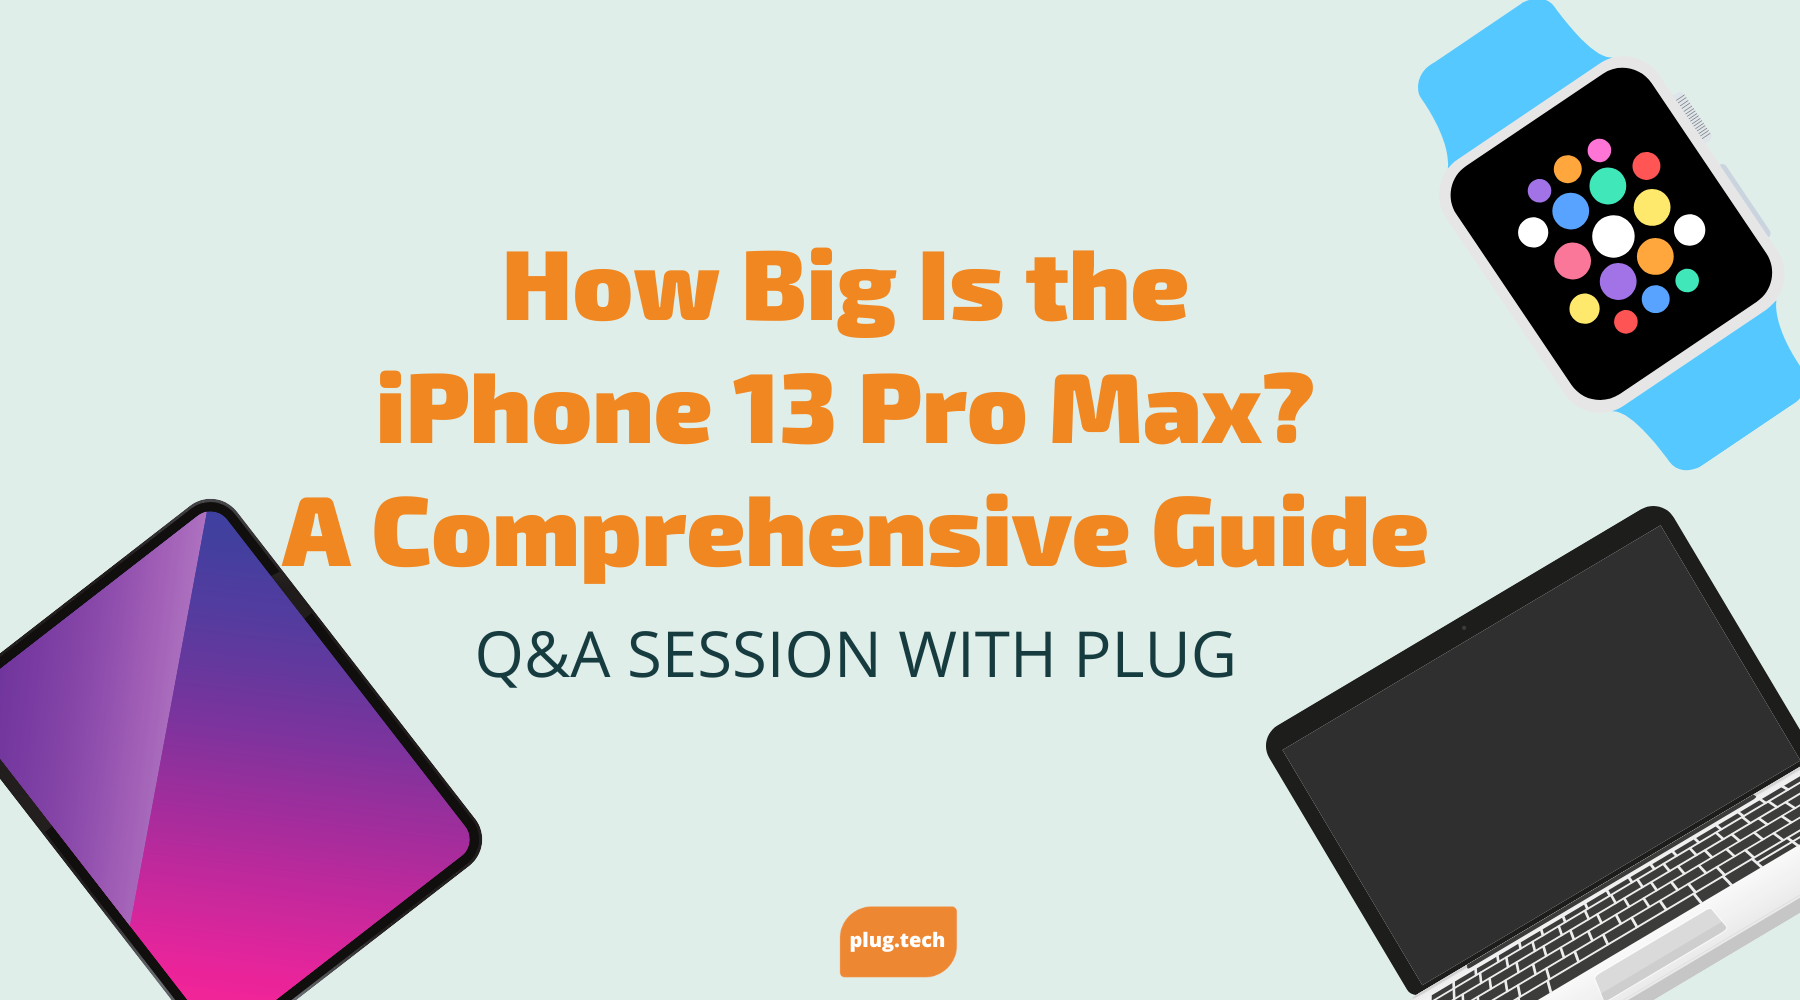 How Big Is the iPhone 13 Pro Max? A Comprehensive Guide